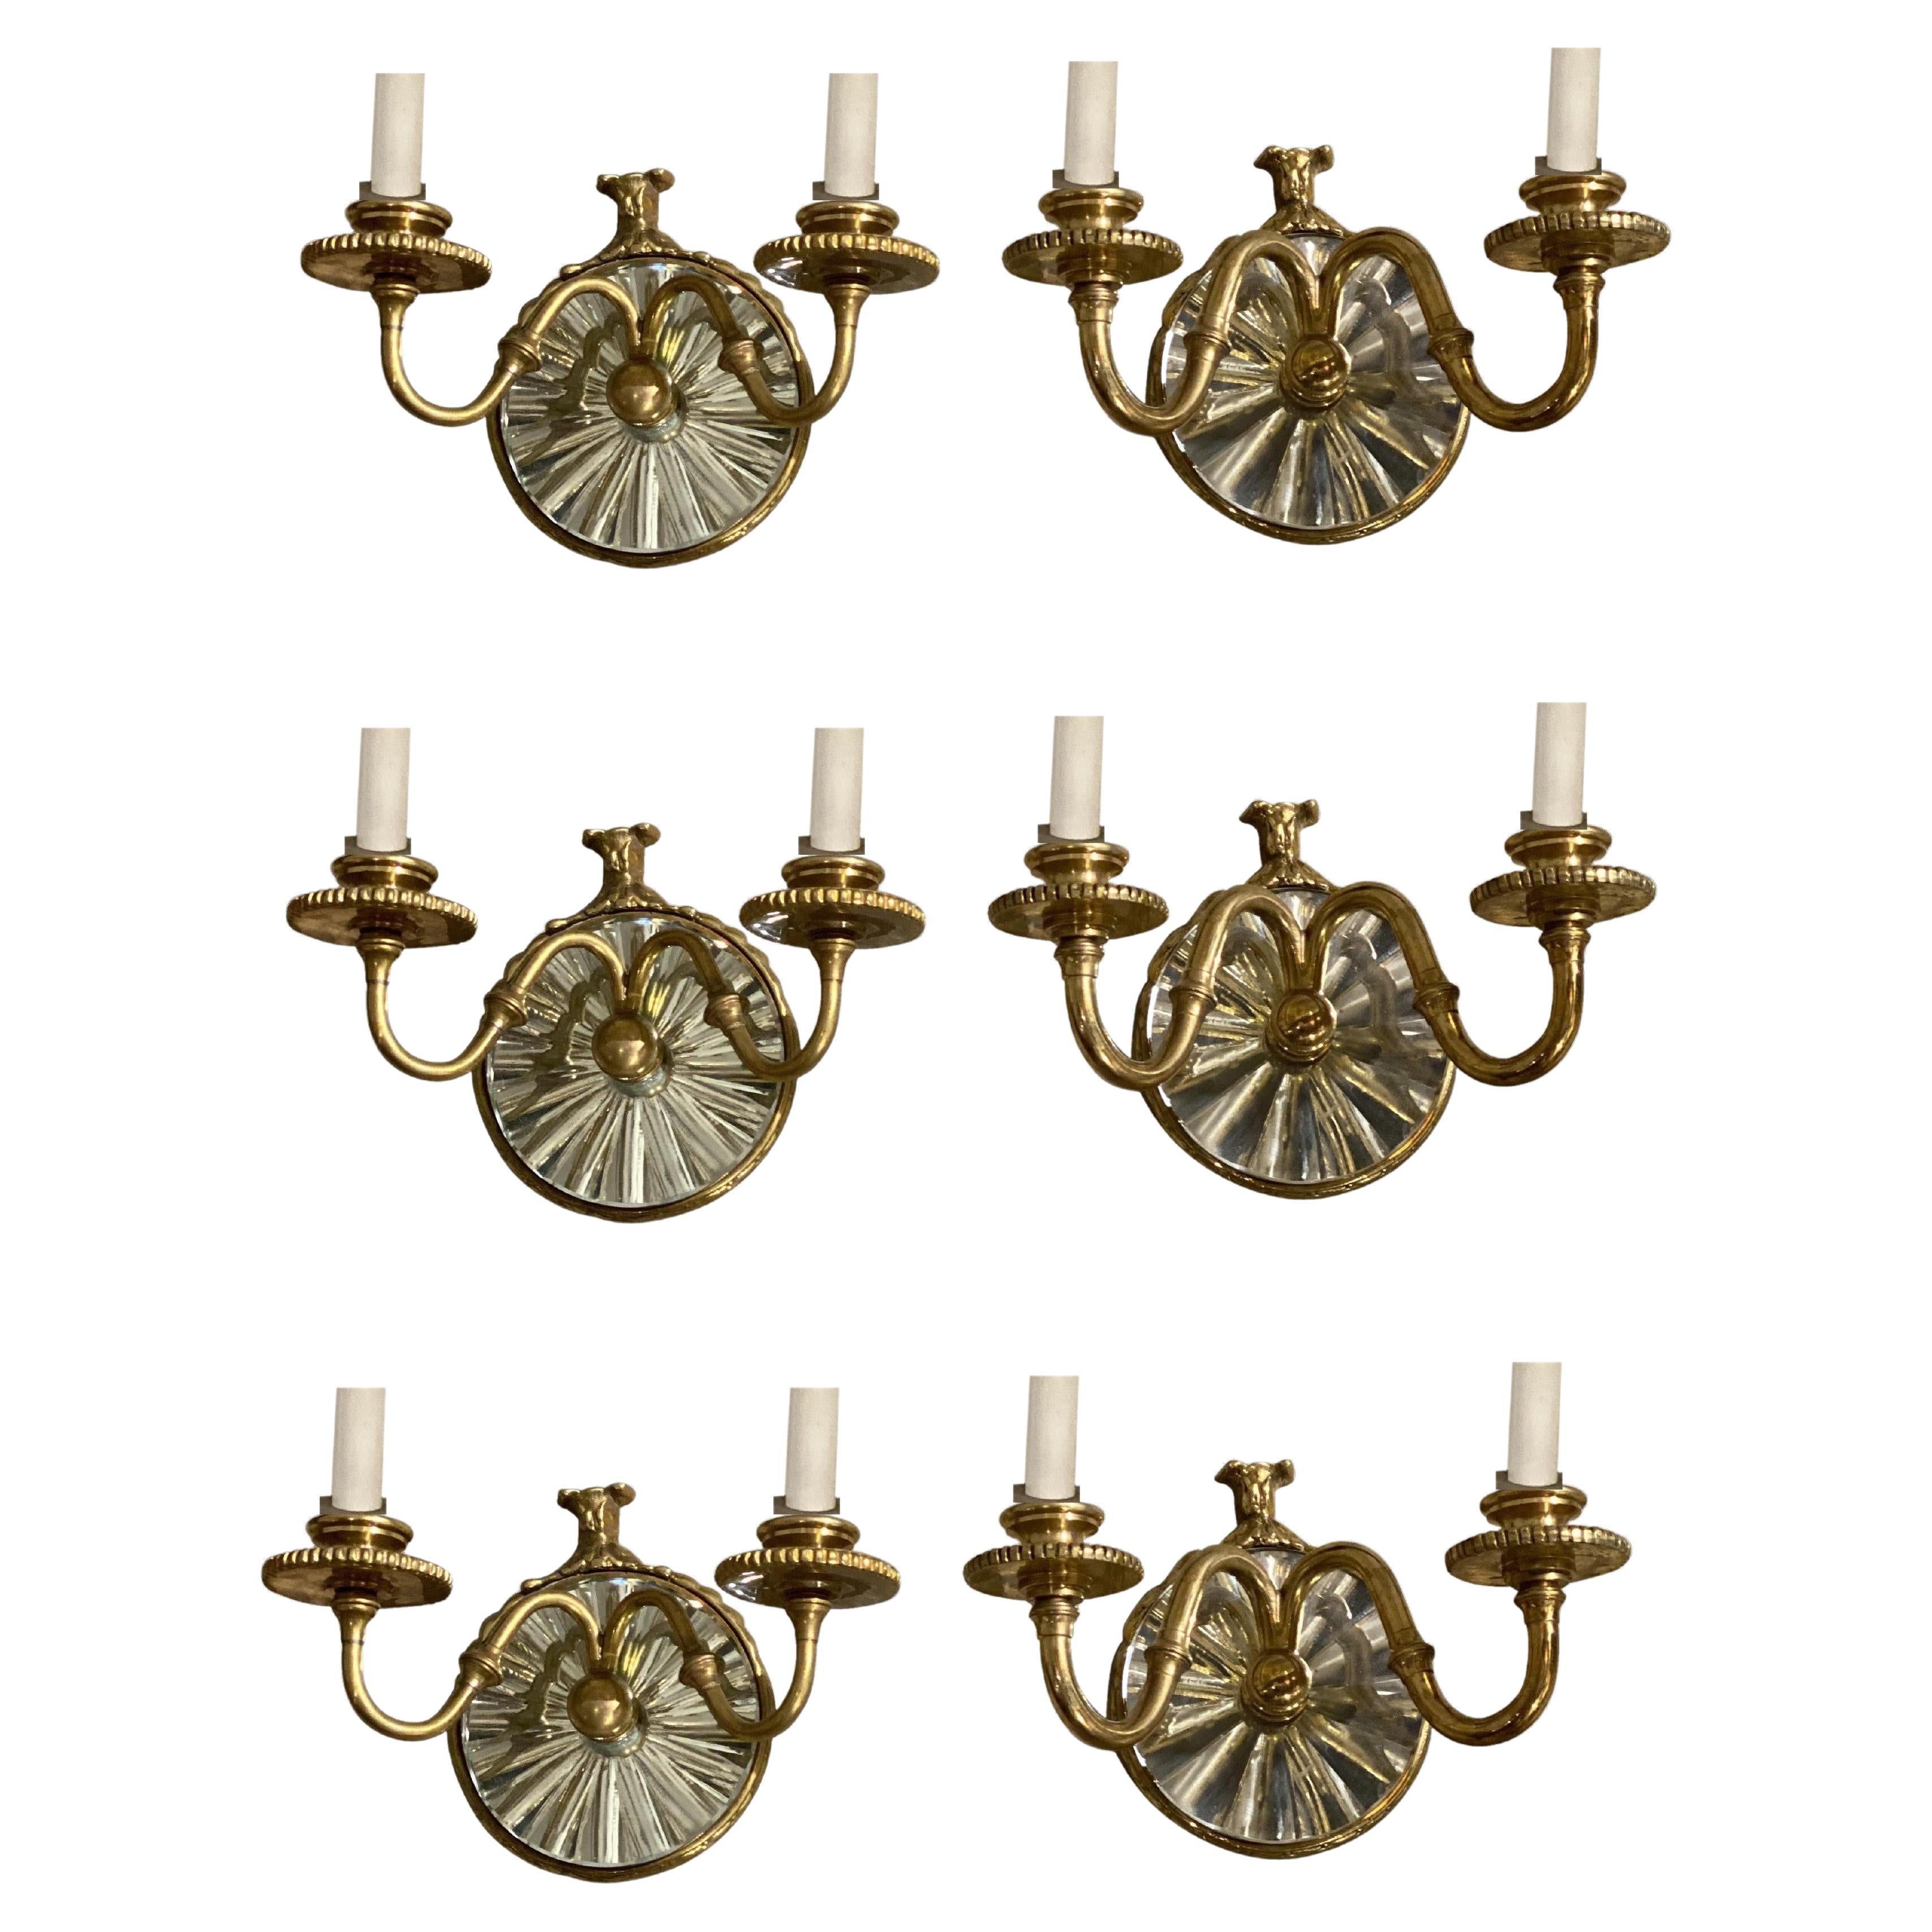 1920's Caldwell Small Mirror Sconces with 2 lights For Sale